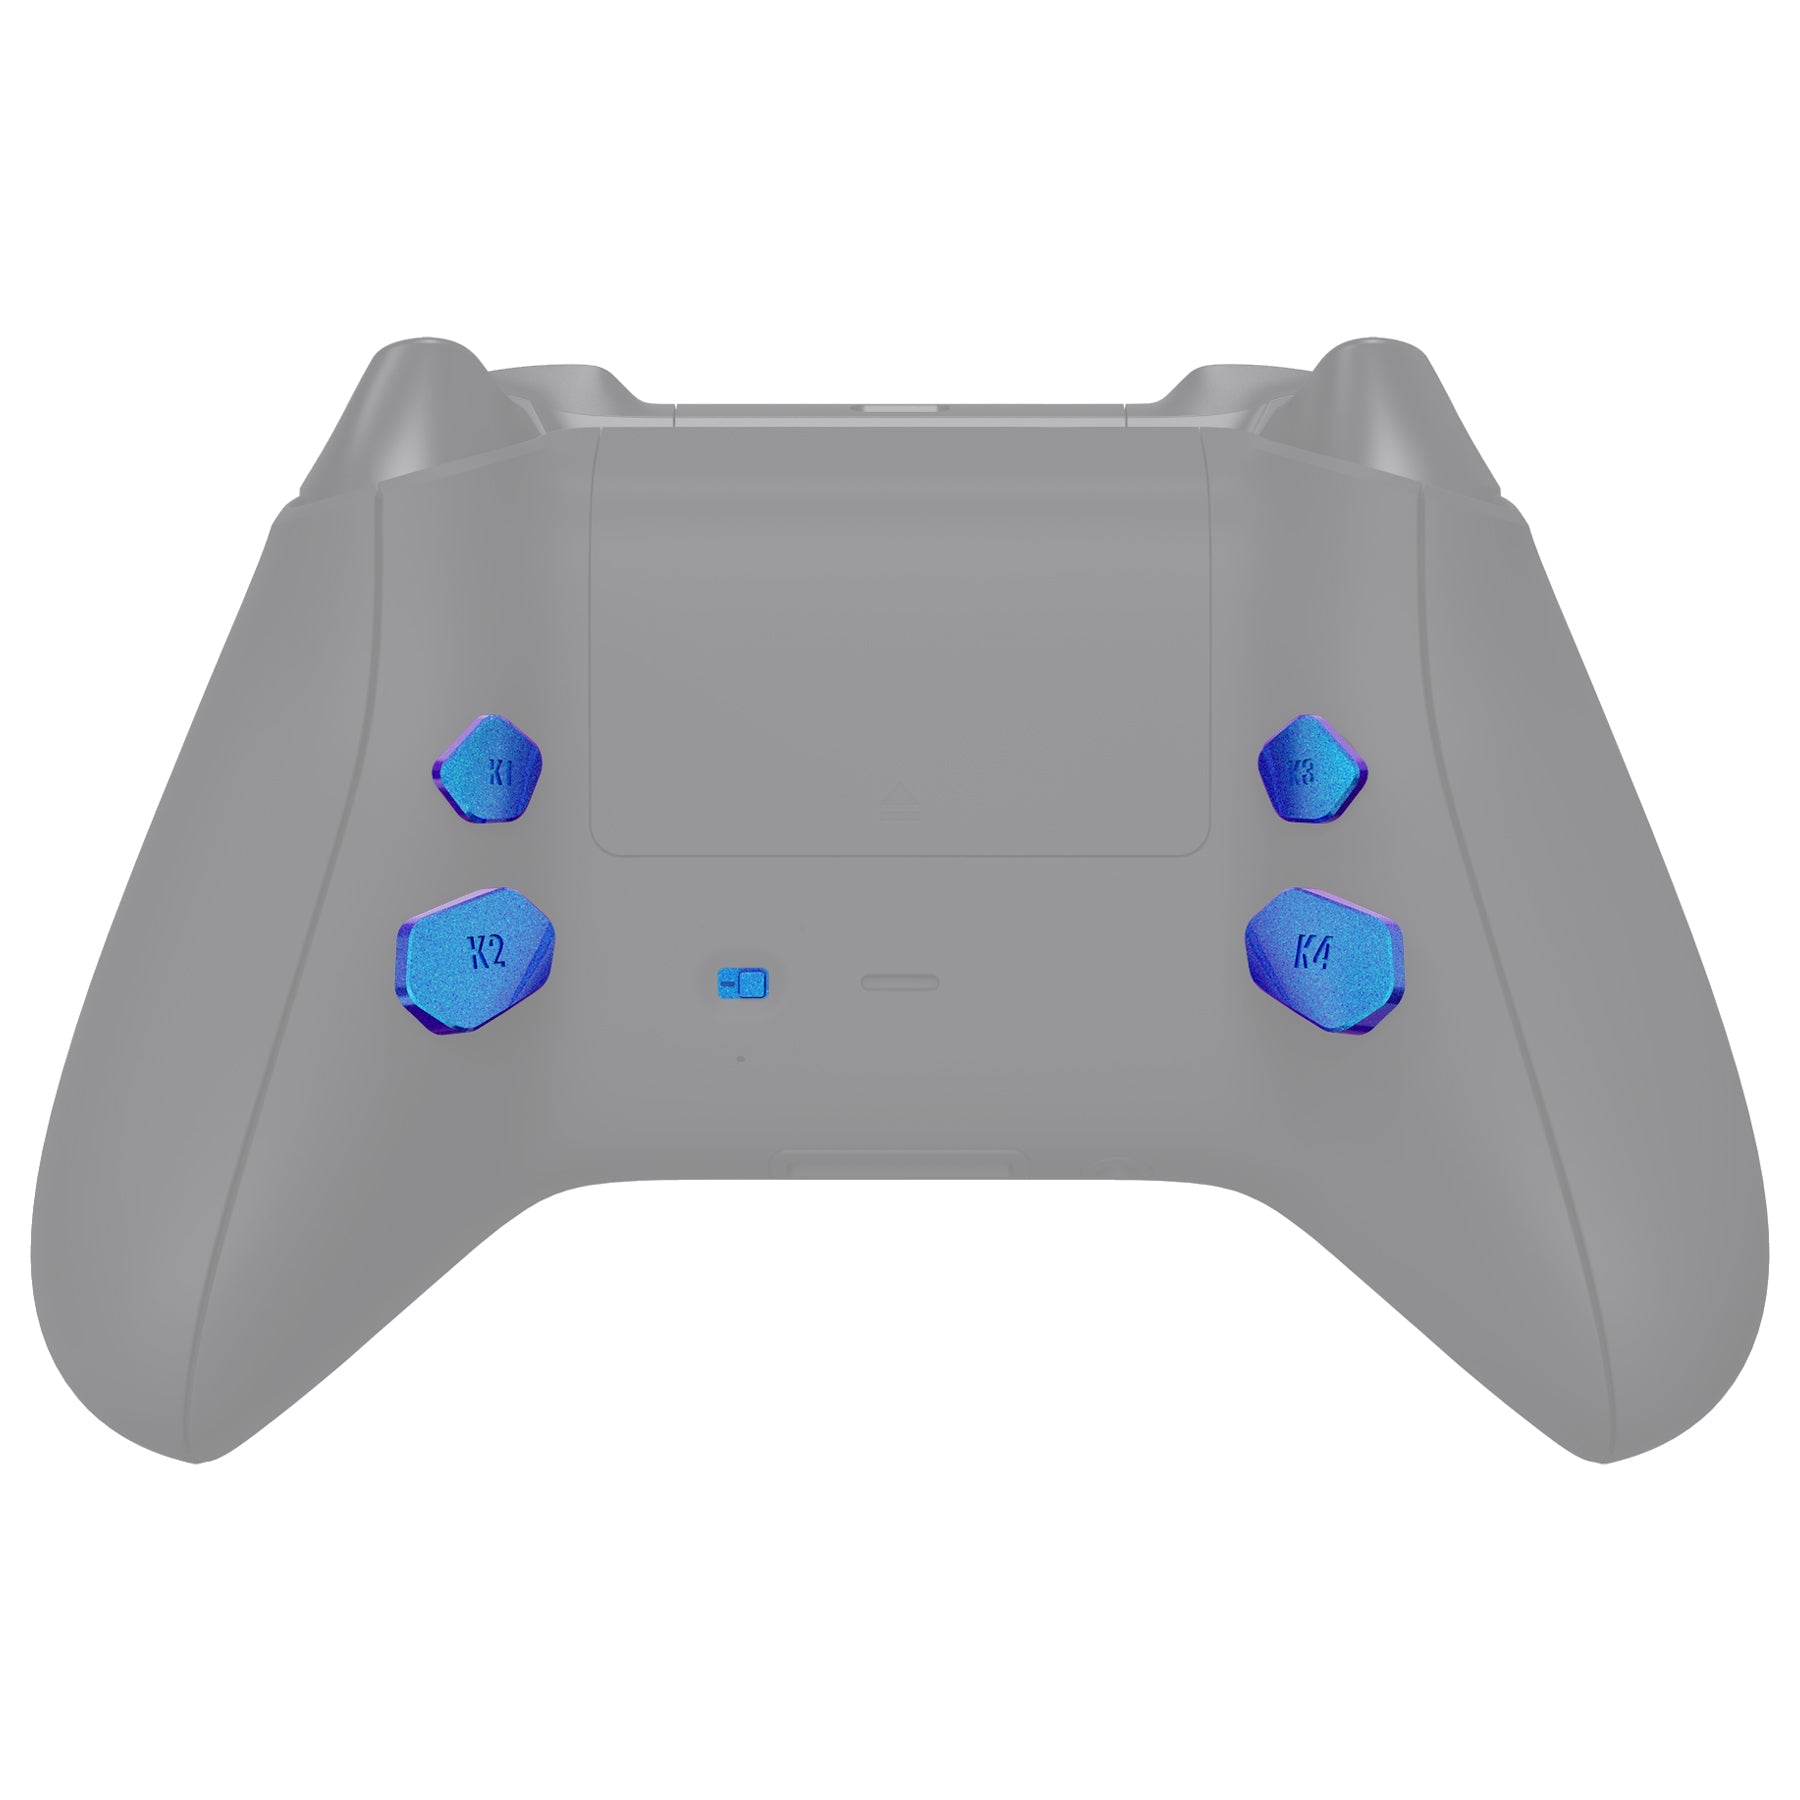 eXtremeRate Retail Chameleon Purple Blue Replacement Redesigned K1 K2 K3 K4 Back Buttons Paddles & Toggle Switch for Xbox Series X/S Controller eXtremerate Hope Remap Kit - Controller & Hope Remap Board NOT Included - DX3P3001